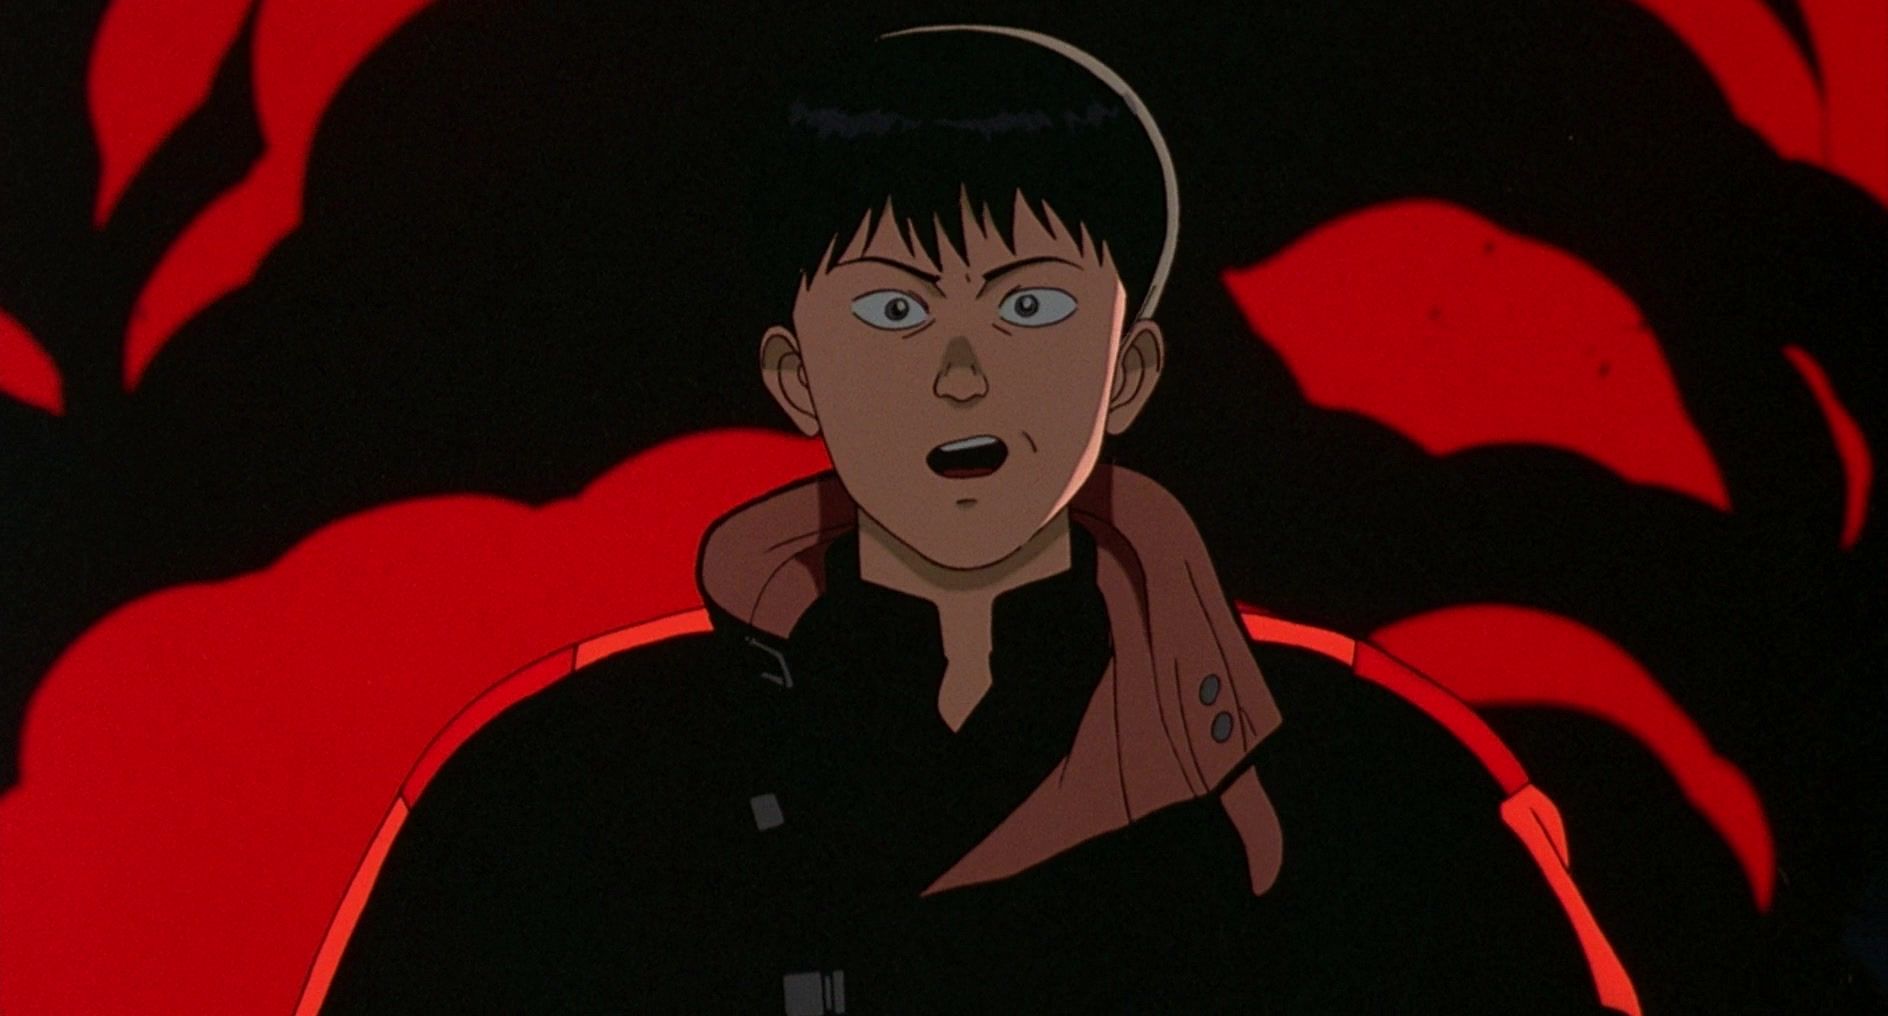 The Creator Of Akira Hated The Anime Movie Adaptation When He First Saw It